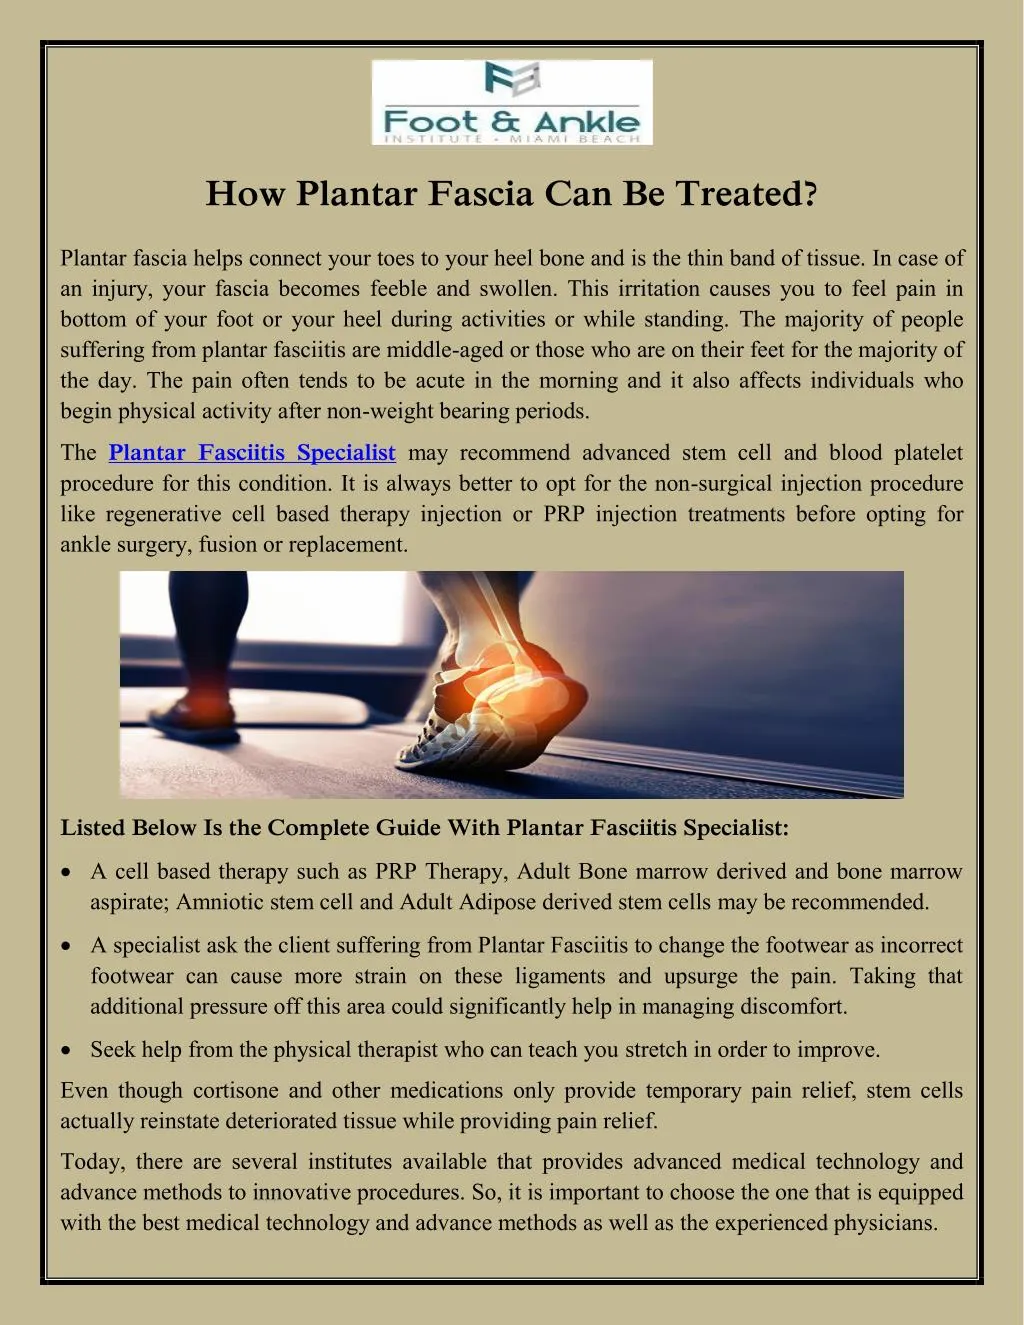 how plantar fascia can be treated